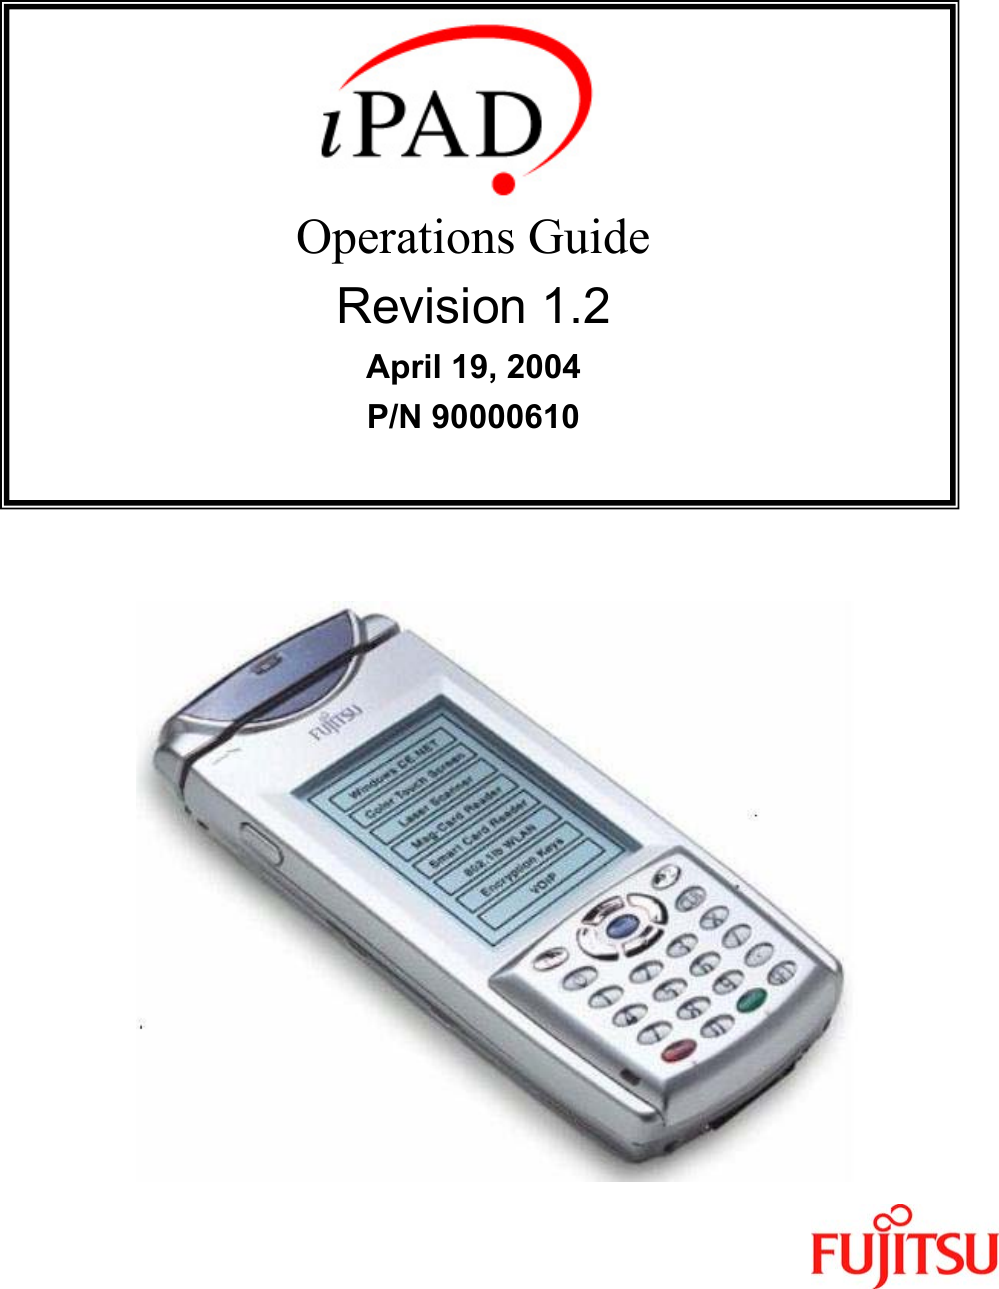        Operations Guide Revision 1.2 April 19, 2004 P/N 90000610        